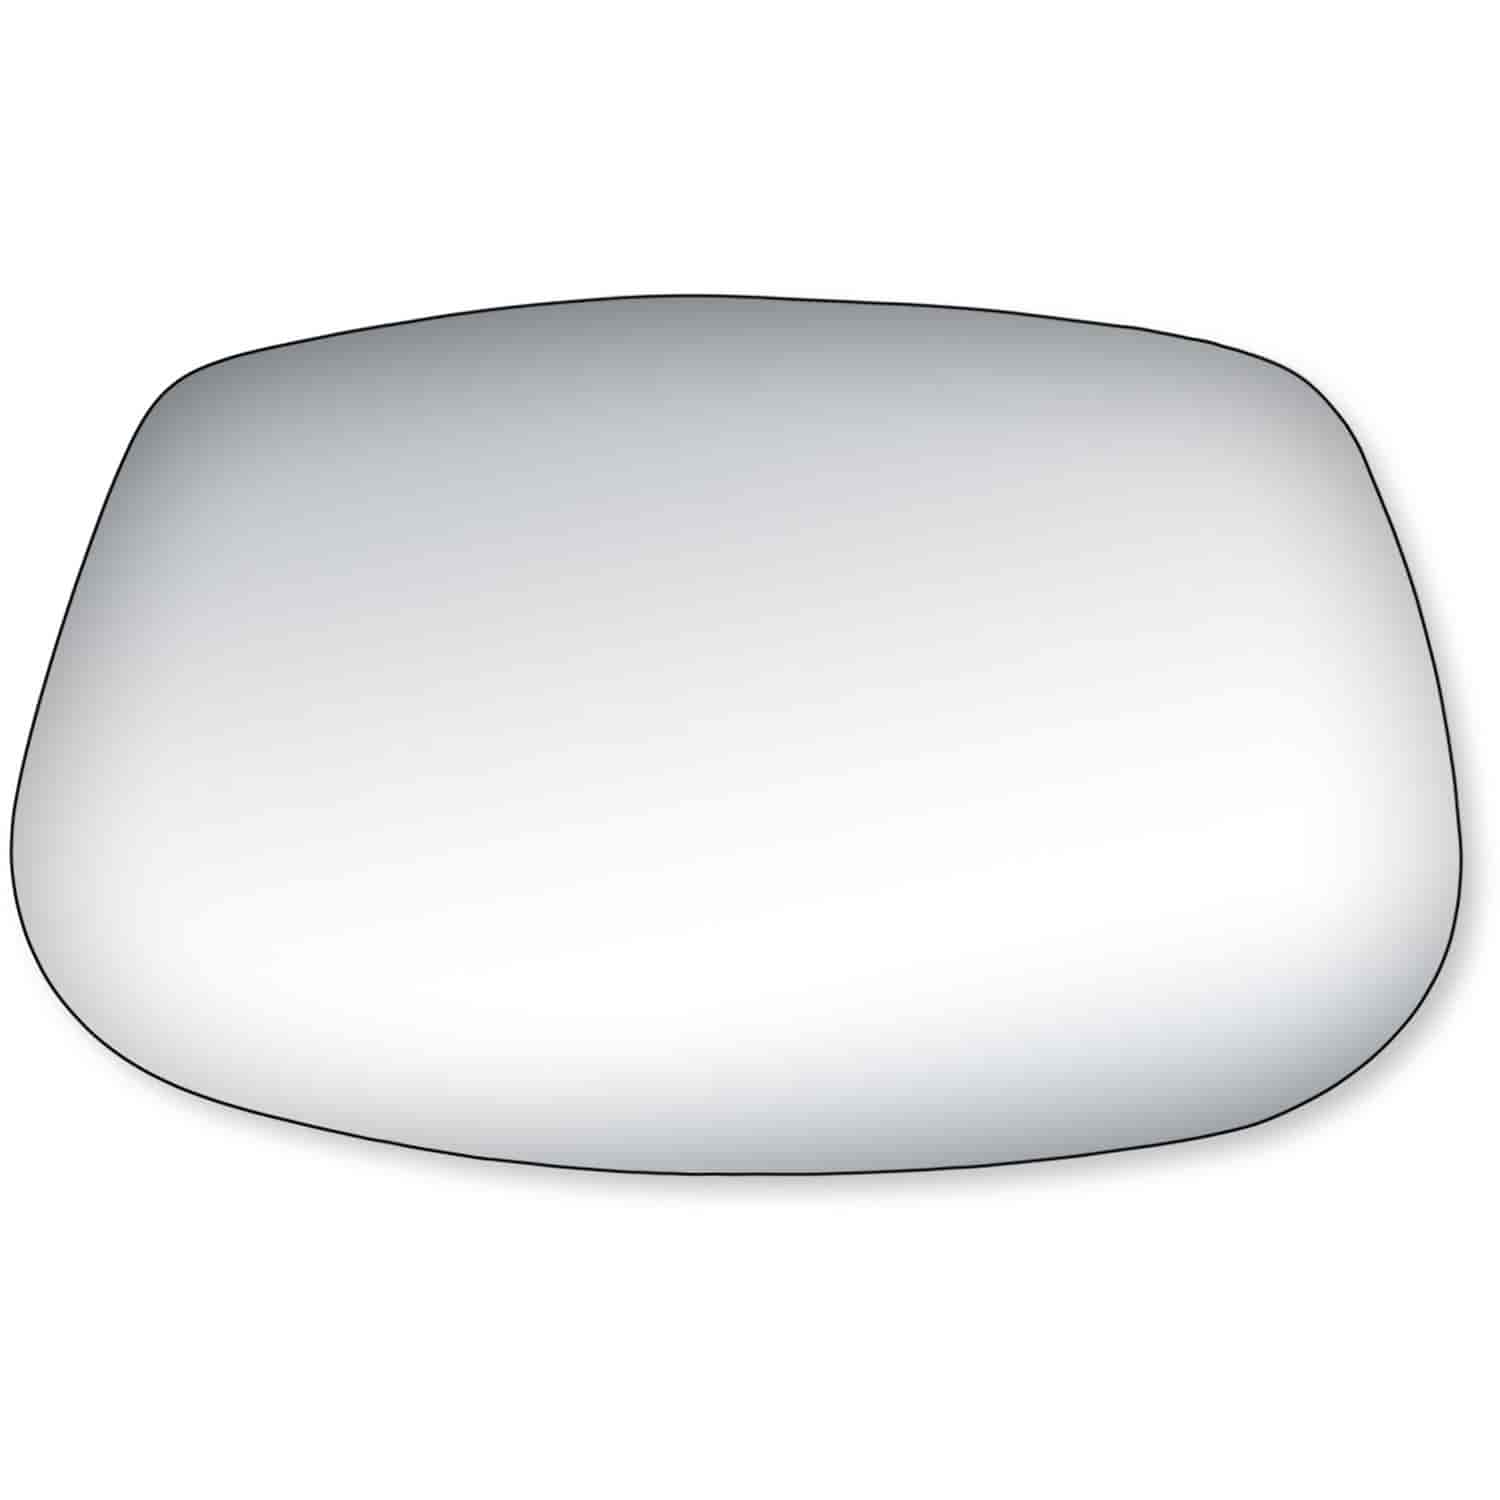 Replacement Glass for 80-90 Electra; 80-90 Estate Wagon; 80-90 LeSabre; 80-90 Caprice Sedan; 80-90 I